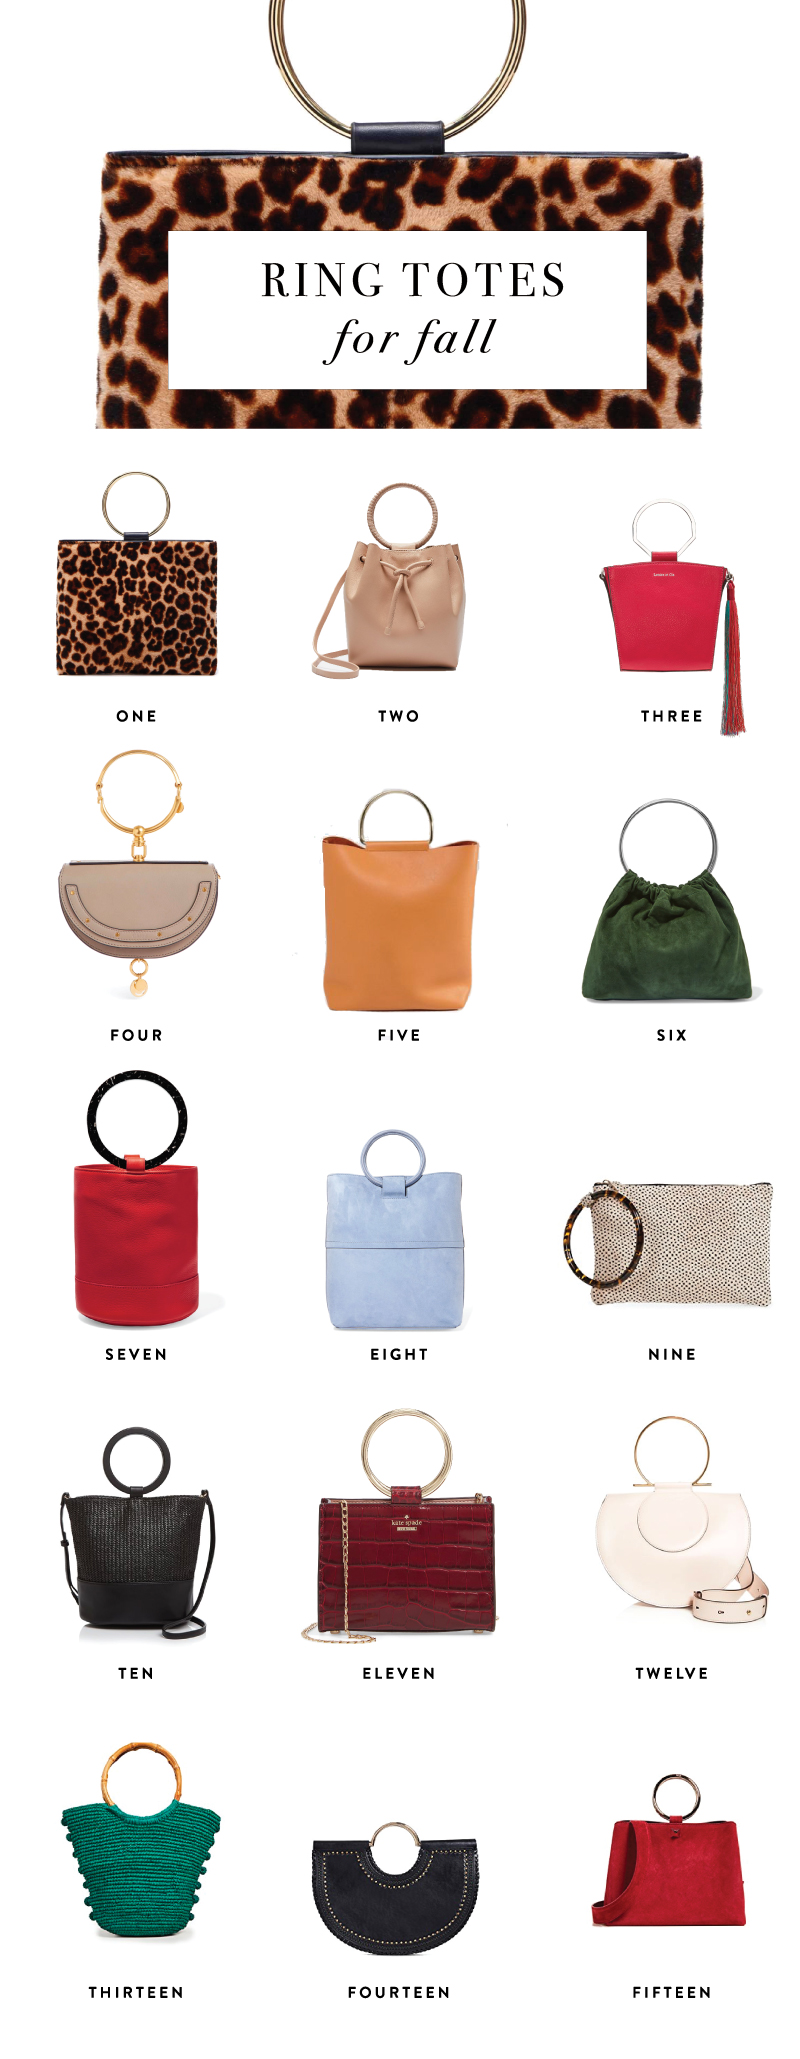 15 Fabulous Ring Totes for Fall: One in every color and budget.